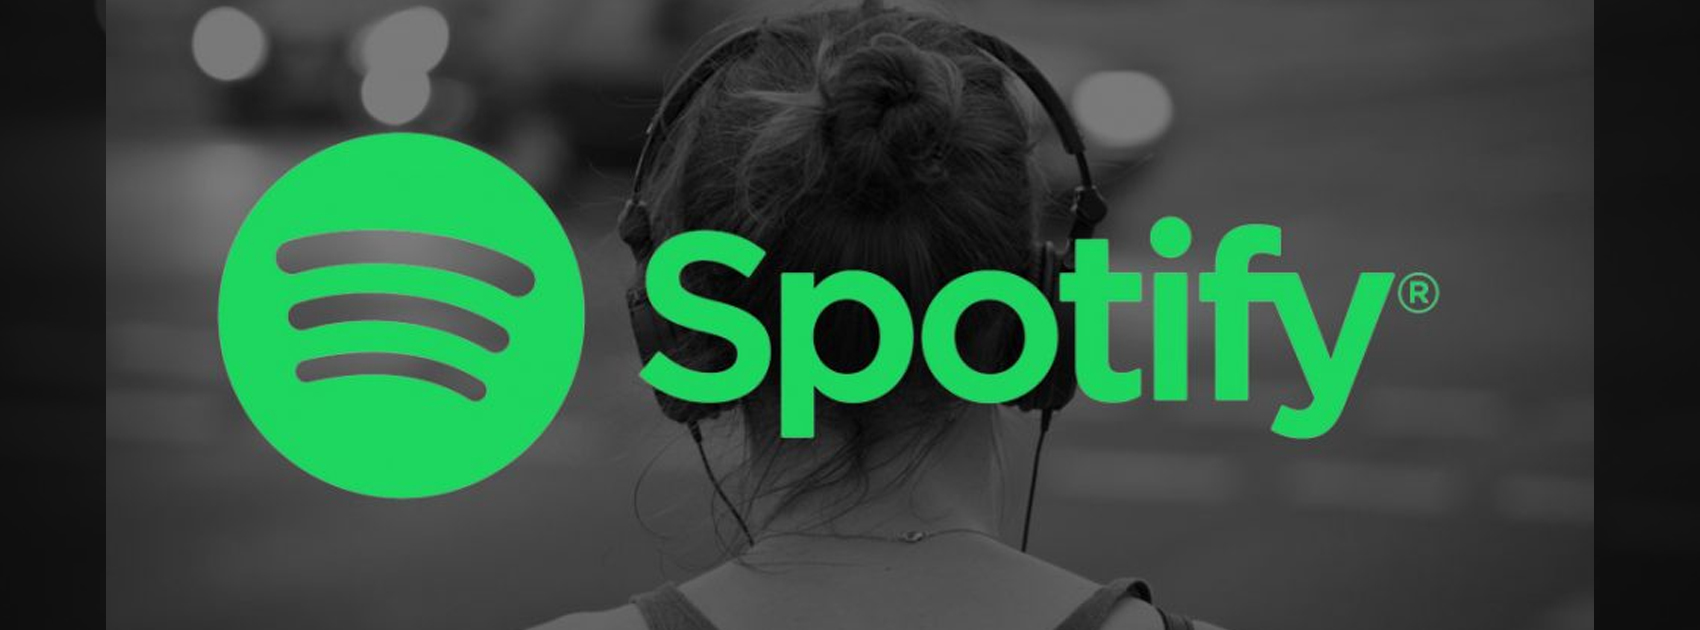 Spotify Founding Story,Startup Stories,Latest Business News 2019,Spotify Business Goals,Spotify Success Factors,Spotify Funding History,Spotify Latest News,Spotify Founder,Free Music App Spotify,Spotify Funding Journey,History of Spotify